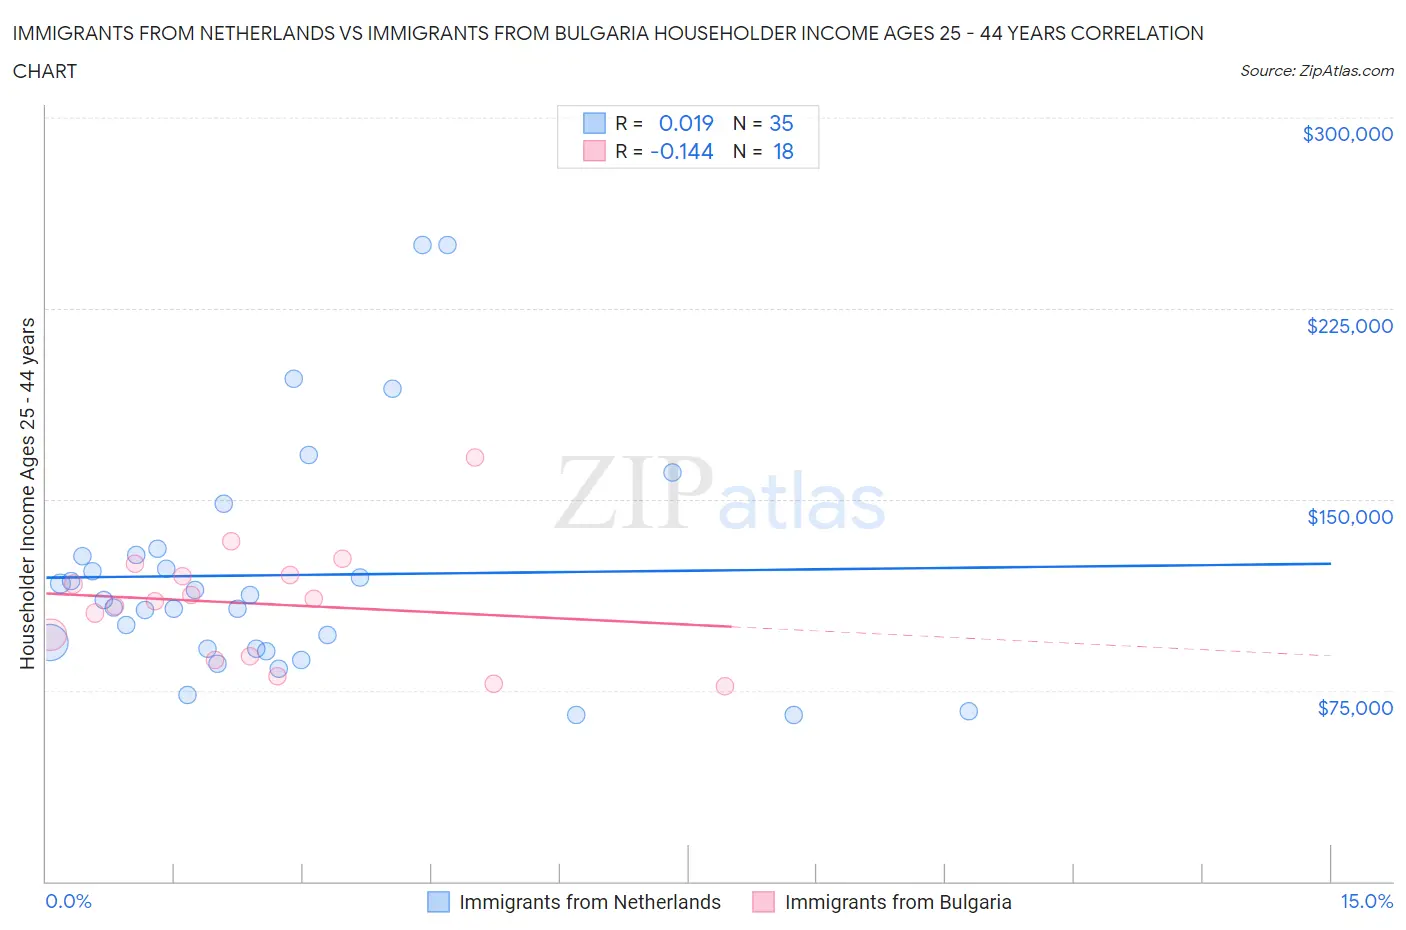 Immigrants from Netherlands vs Immigrants from Bulgaria Householder Income Ages 25 - 44 years